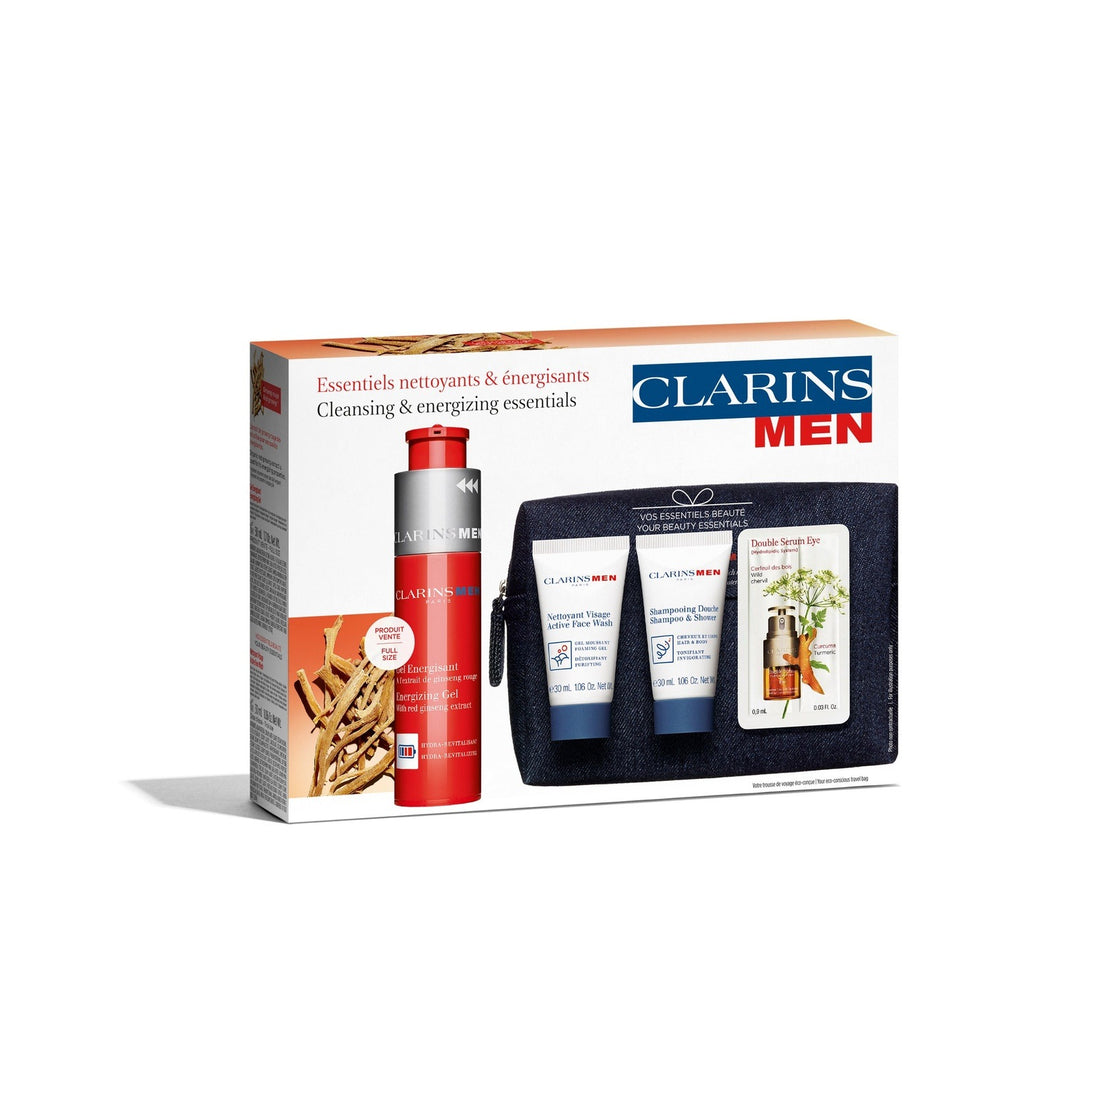 Clarins Men Energizing Value Pack 1 Shaws Department Stores